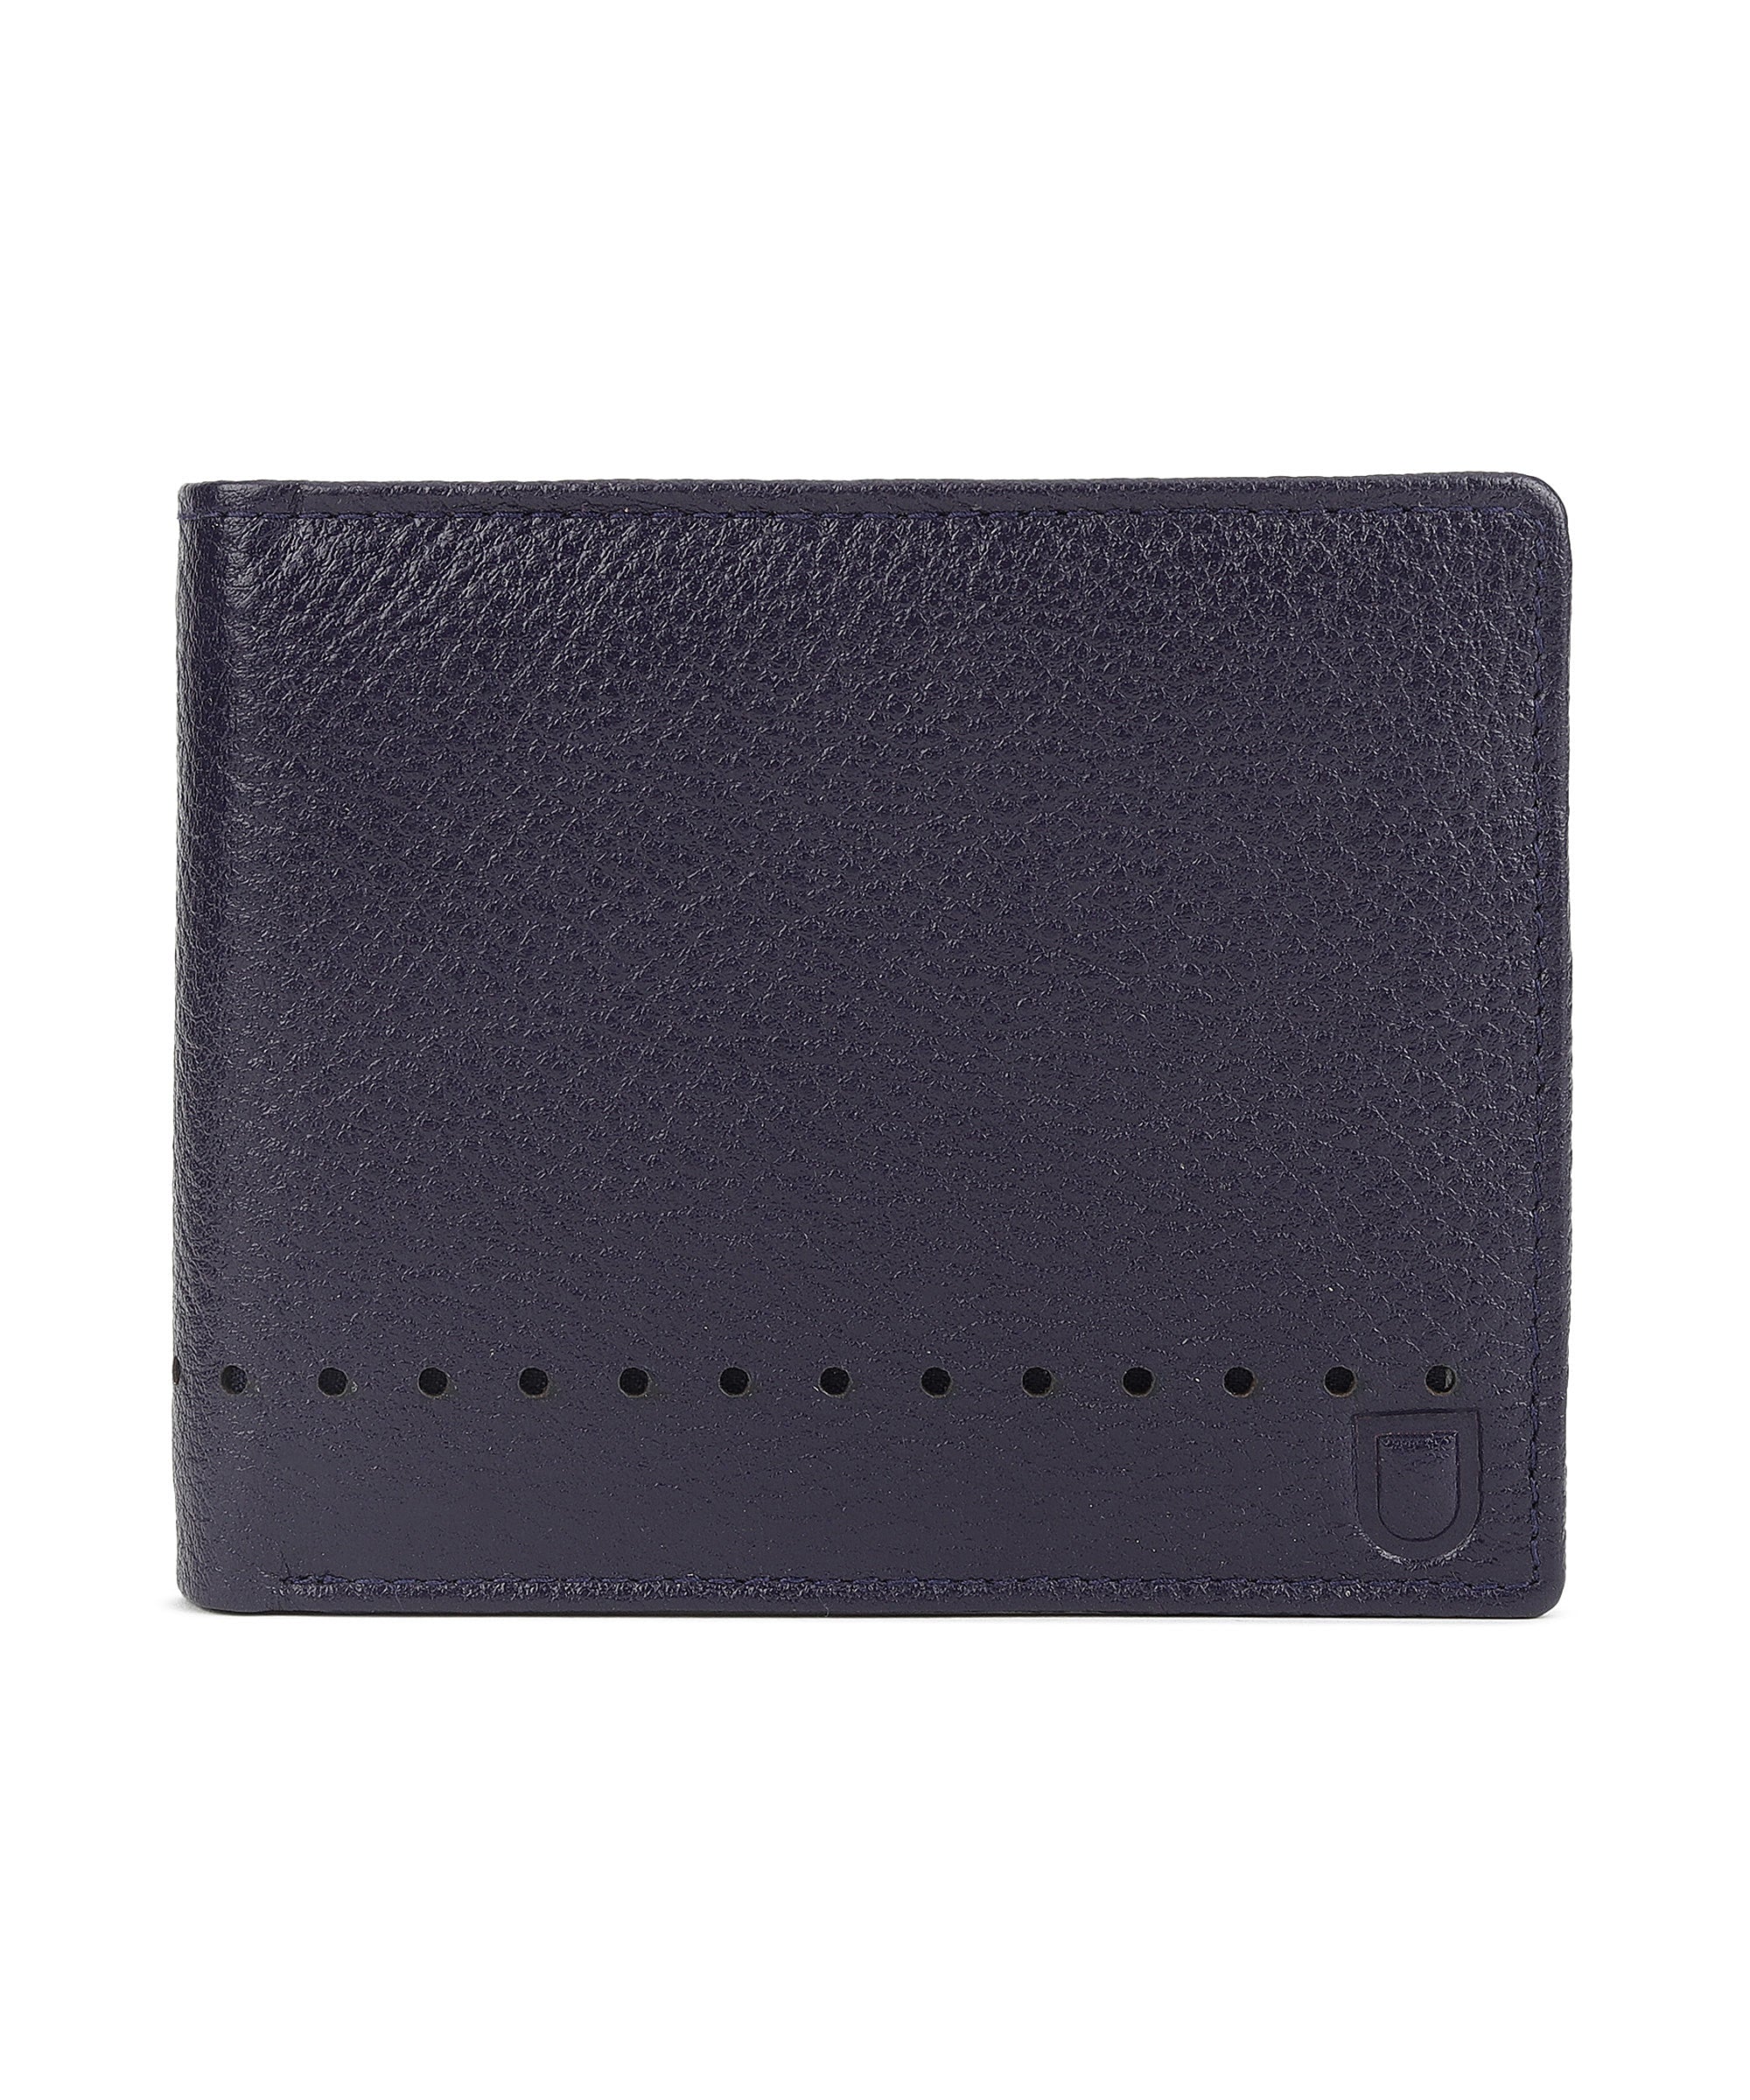 Urbano Fashion Men's Casual, Formal Blue Genuine Leather Wallet-3 Card Slots